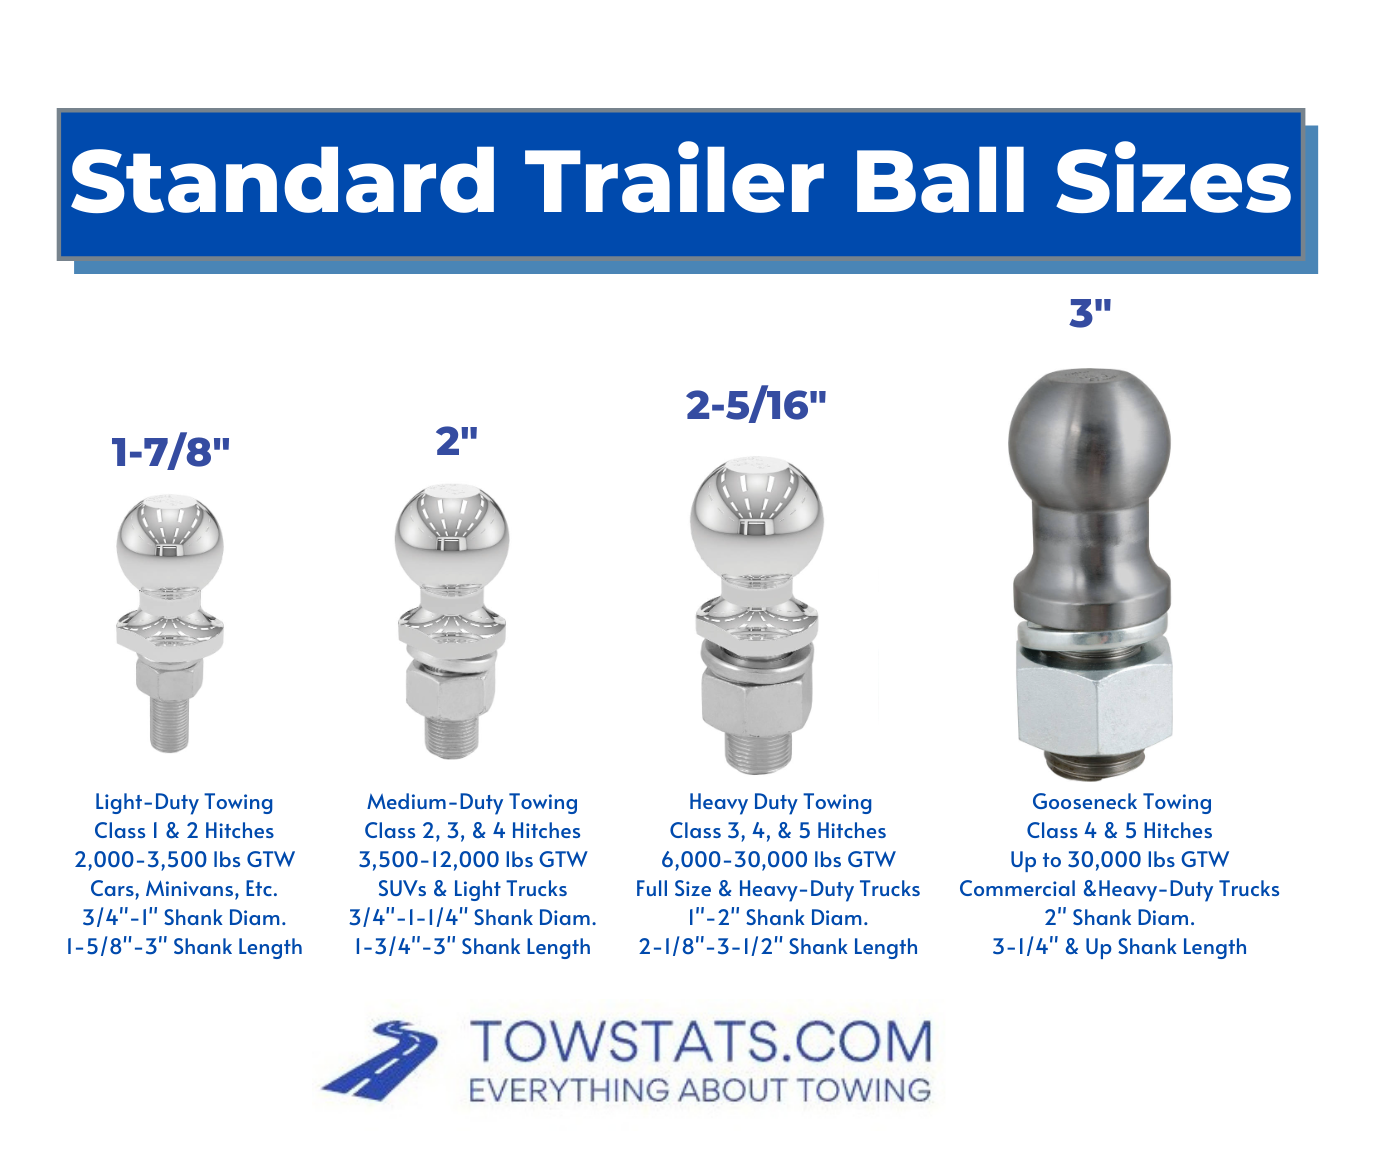 Trailer Ball Sizes What Size Trailer Hitch Do I Need?